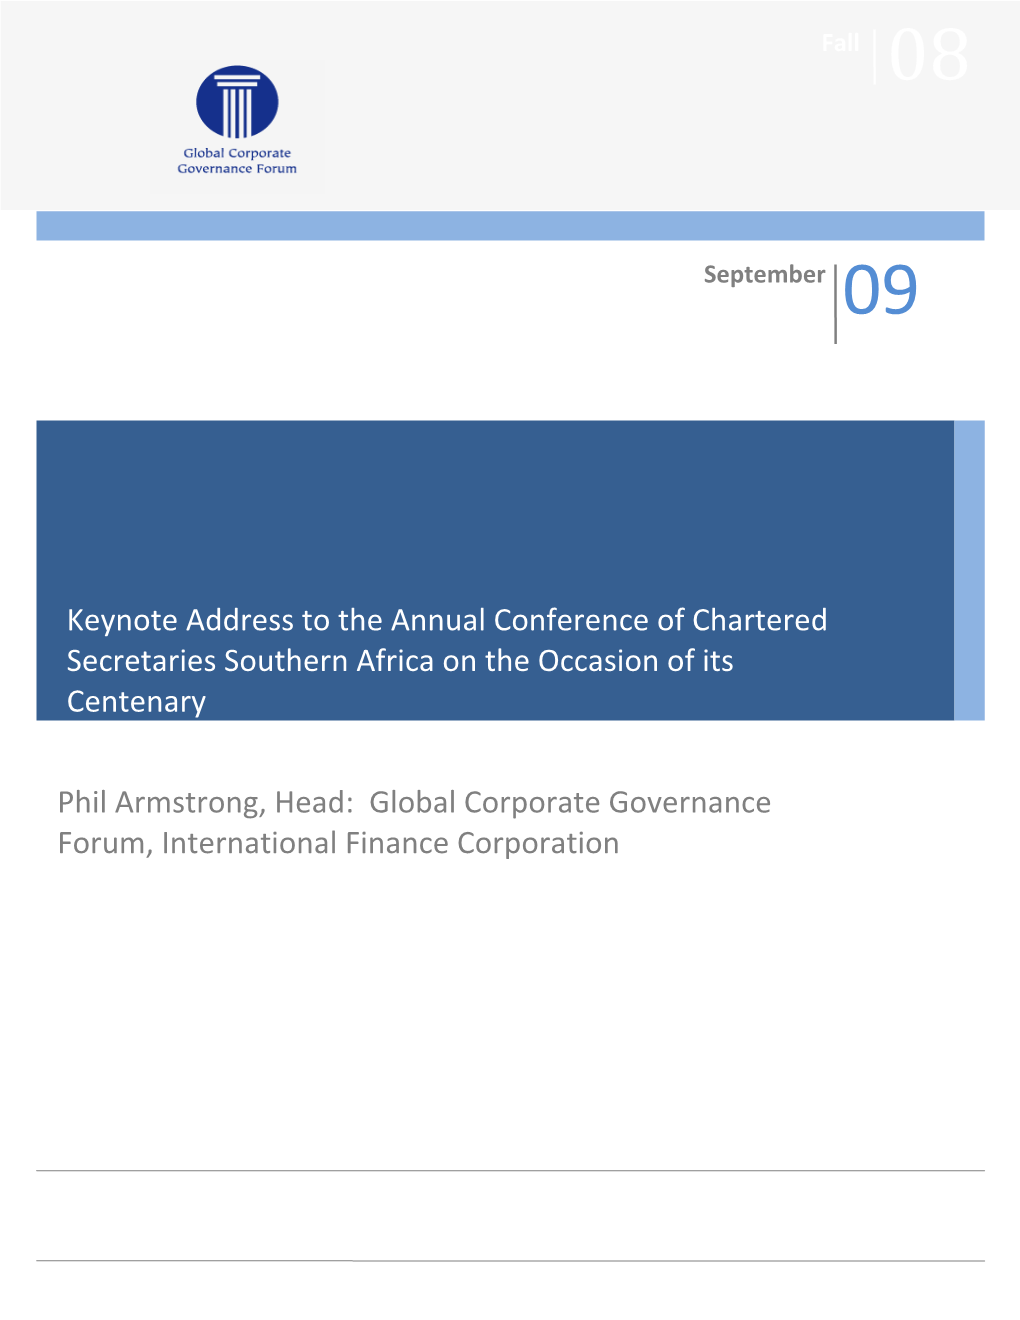 Egyptian Institutes of Directors 3Rd Annual International Conference on Corporate Governance